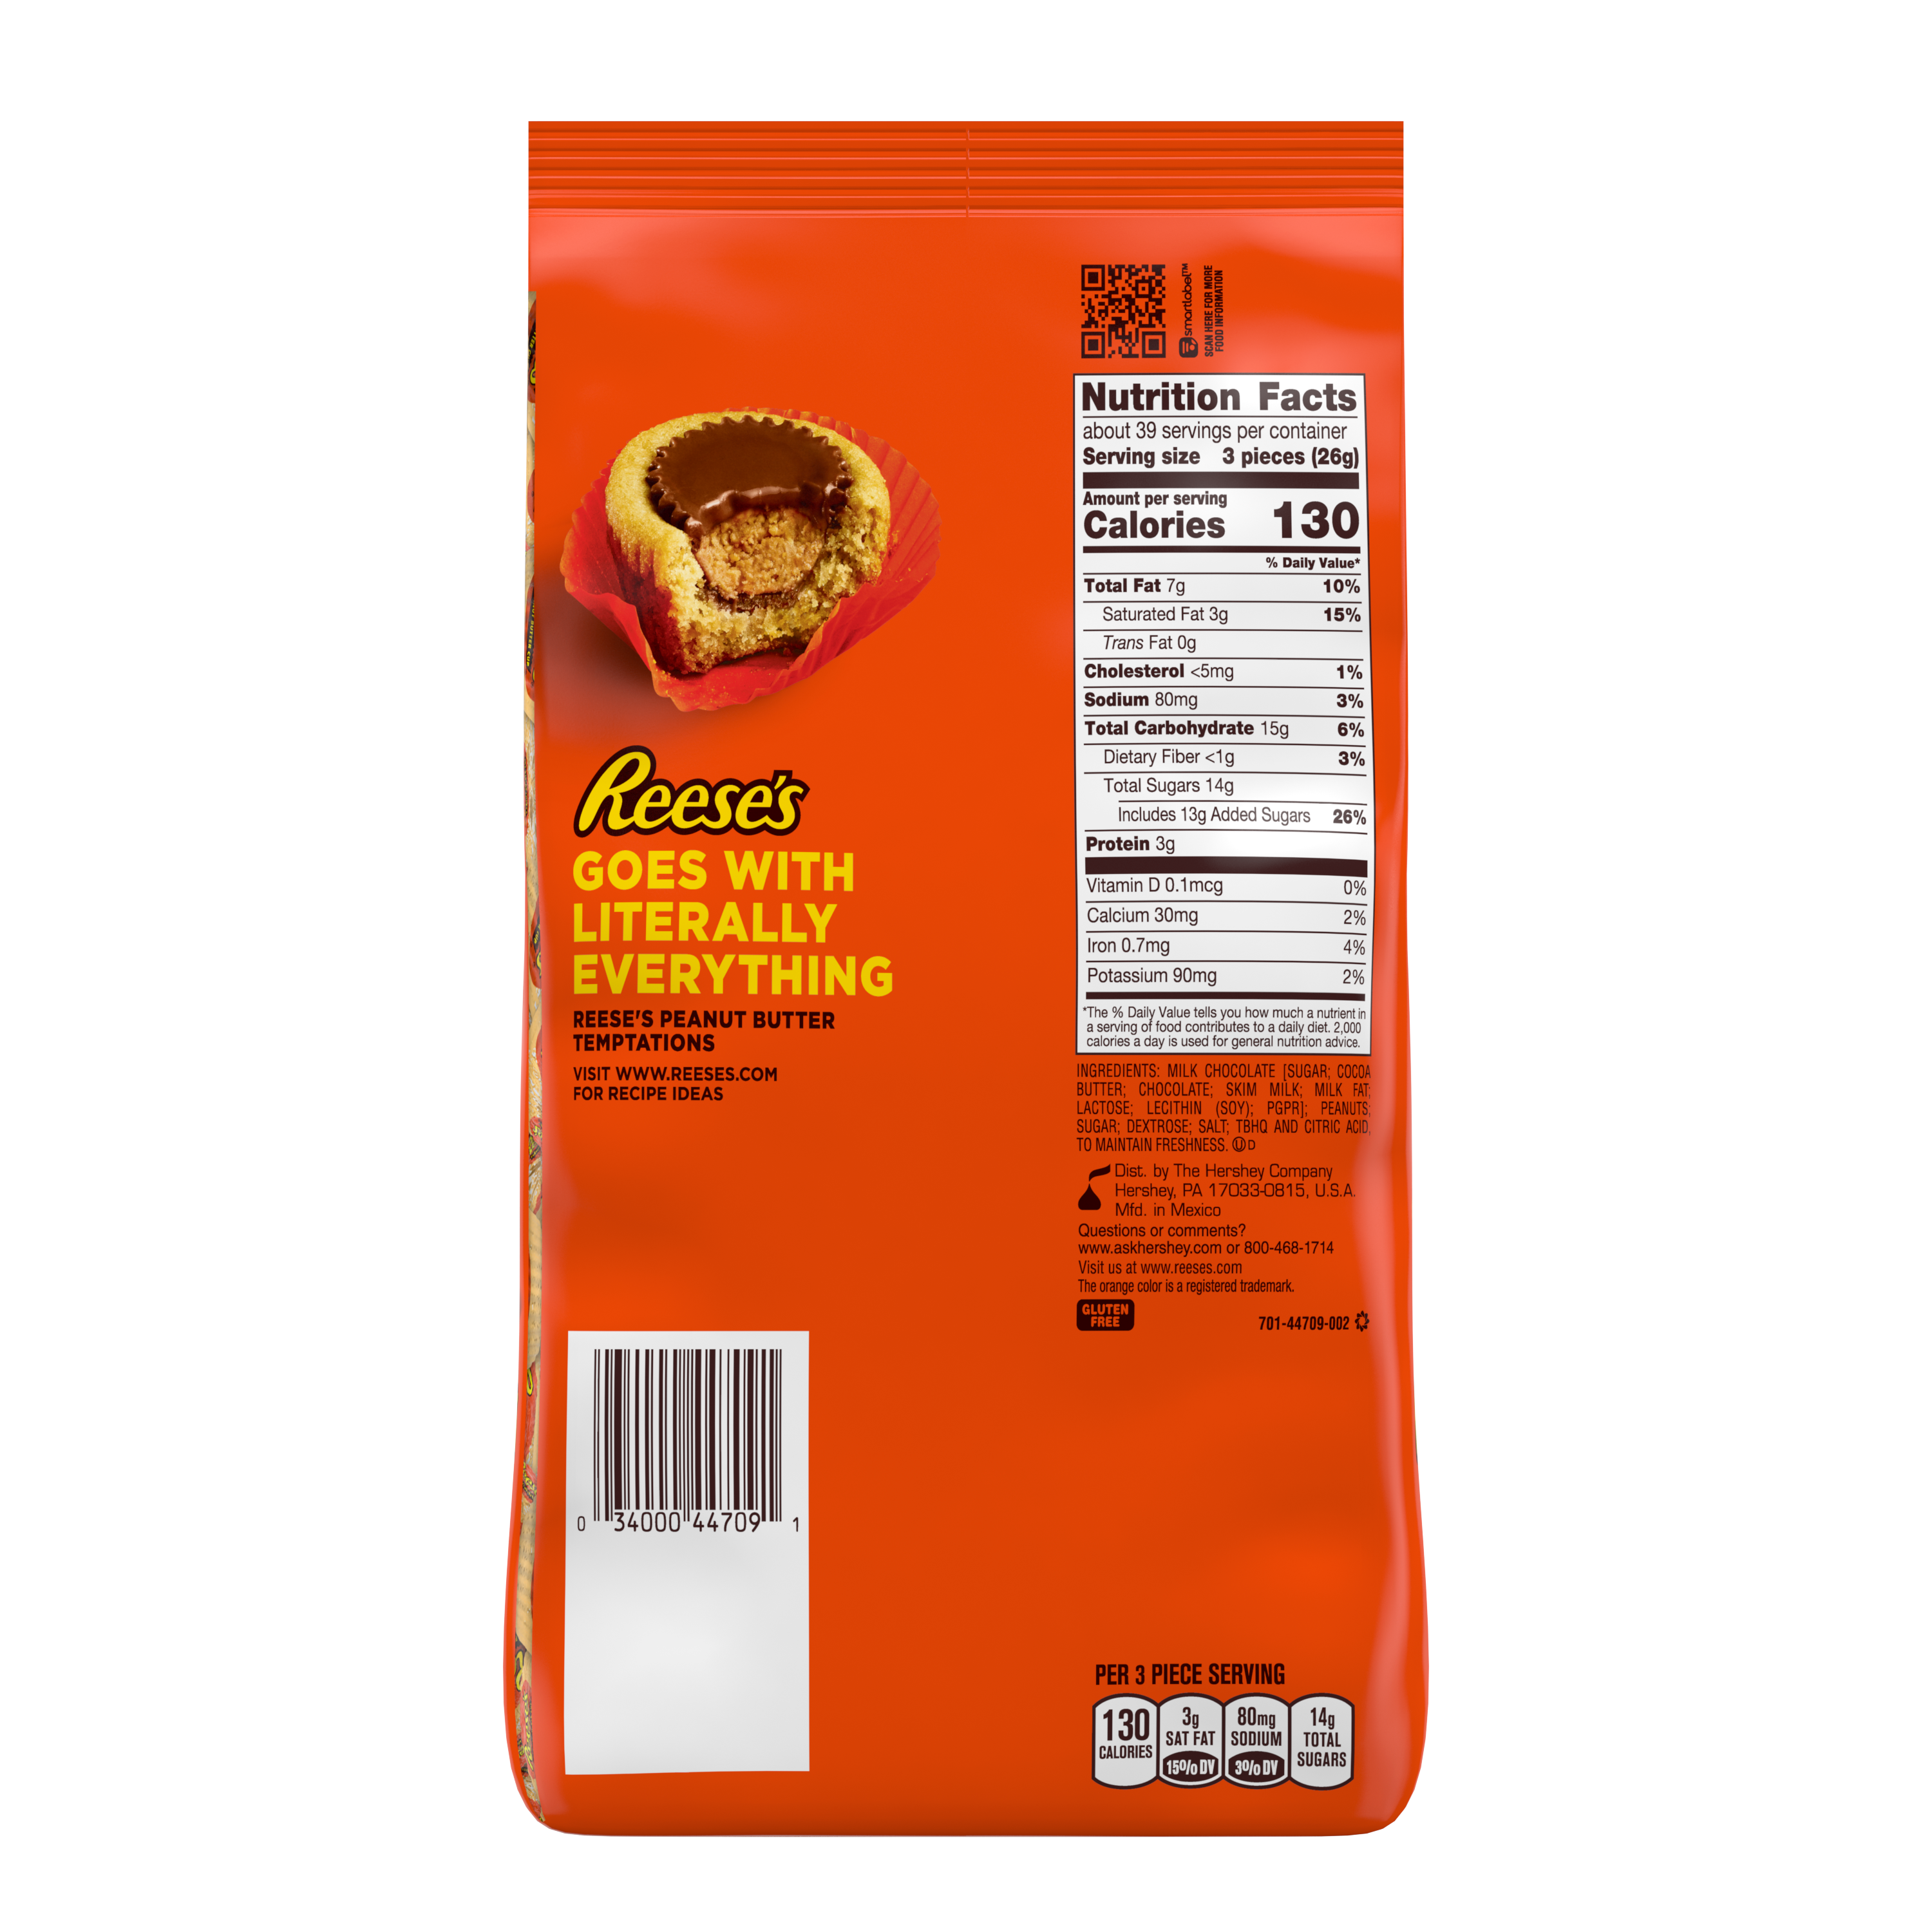 REESE'S Miniatures Milk Chocolate Peanut Butter Cups, 35.6 oz pack - Back of Package